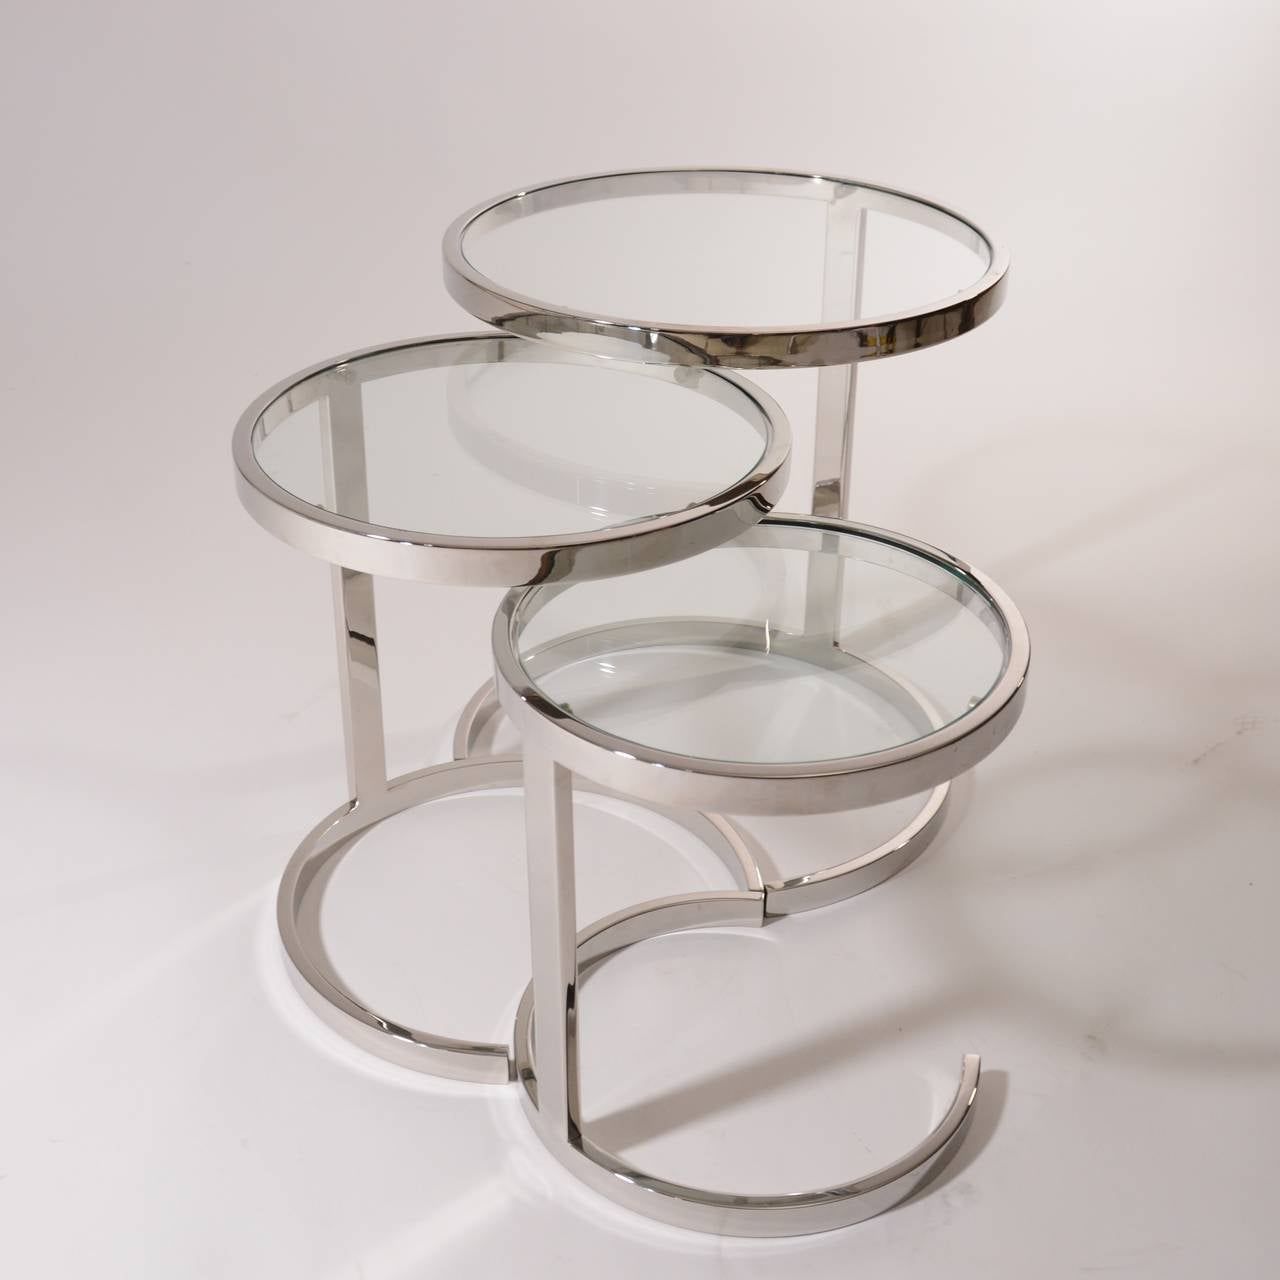 Glass And Stainless Steel Cocktail Tables Within 2020 Set Of 3 Nesting Stainless Steel And Glass Nesting Tablesbrueton (View 2 of 10)